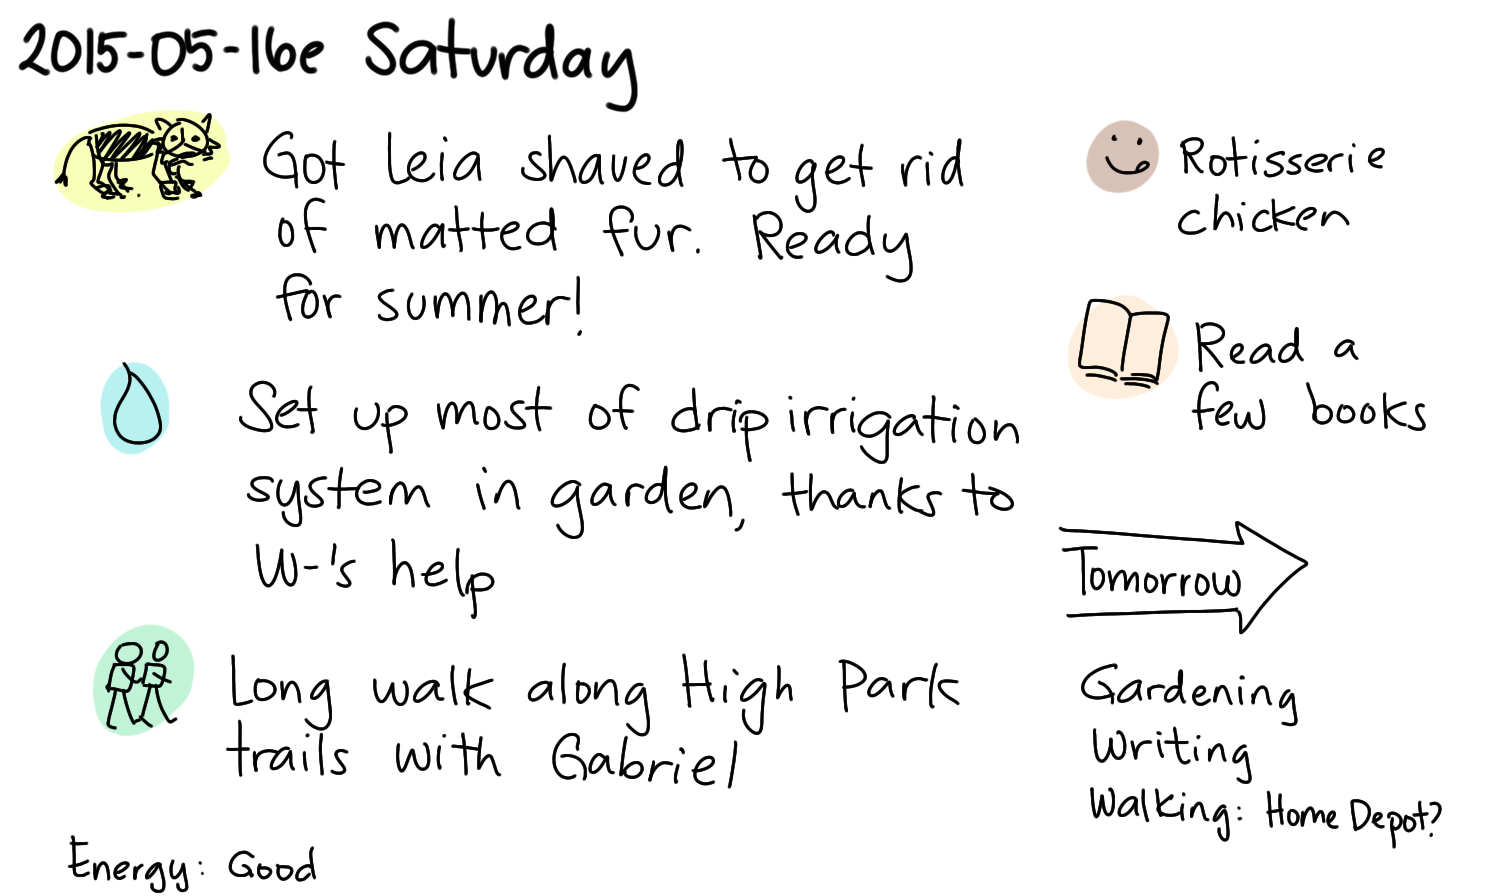 2015-05-16e Saturday -- index card #journal.png